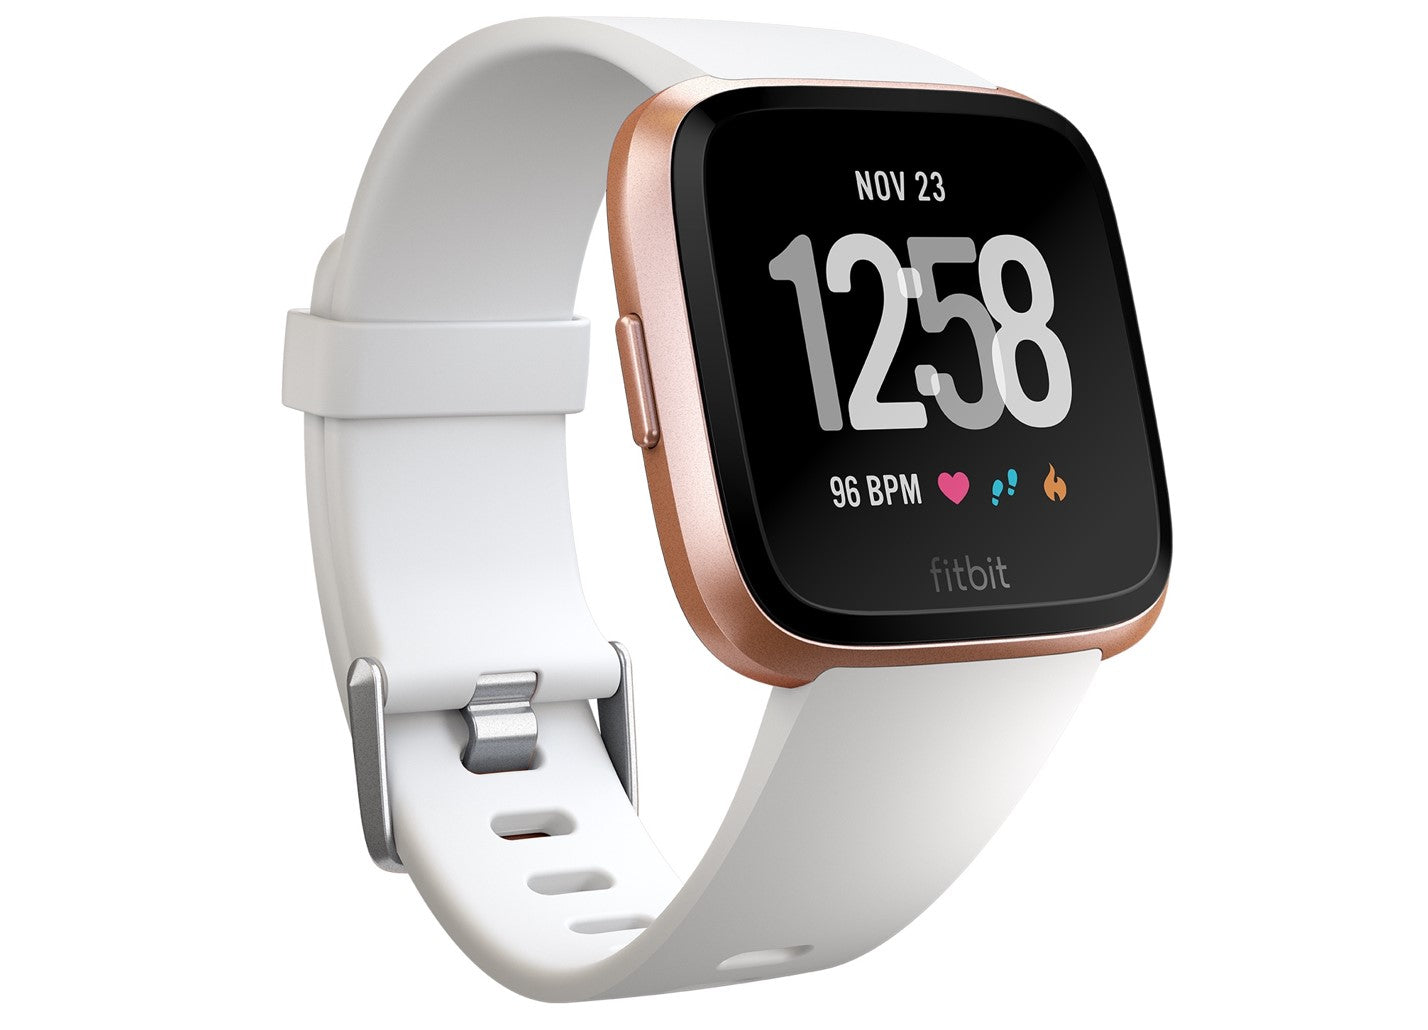 Fitbit FBR504RGWT-RB Versa Smart Watch, Rose Gold /White, One Size - Certified Refurbished